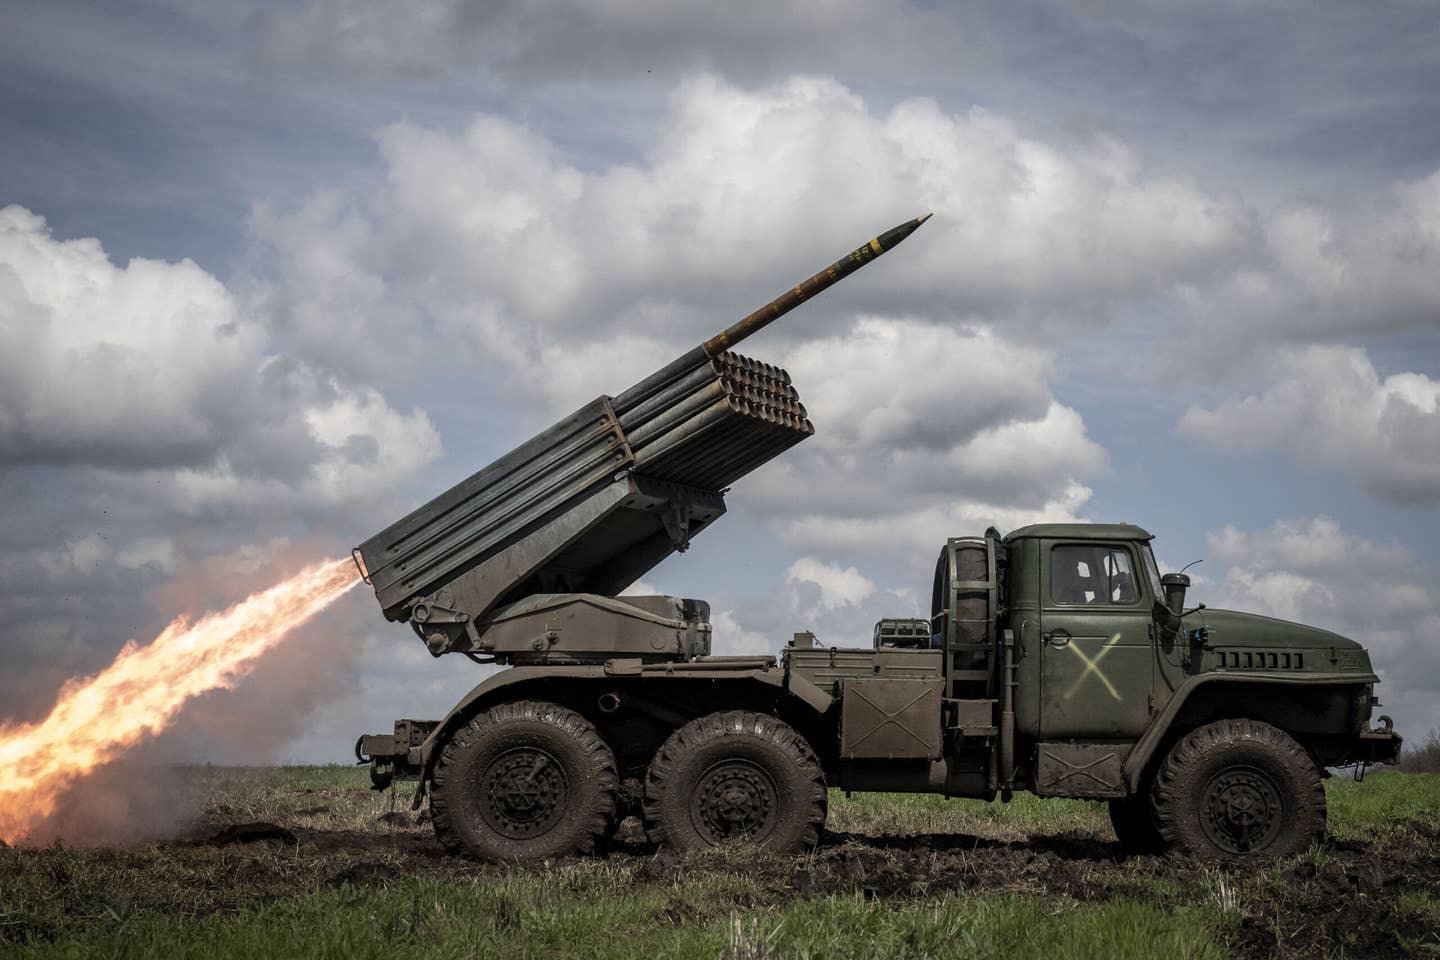 The U.S. has provided more than 60,000 122mm rockets for Ukraine's Grad multiple-launch rocket system. (Photo by Muhammed Enes Yildirim/Anadolu Agency via Getty Images)